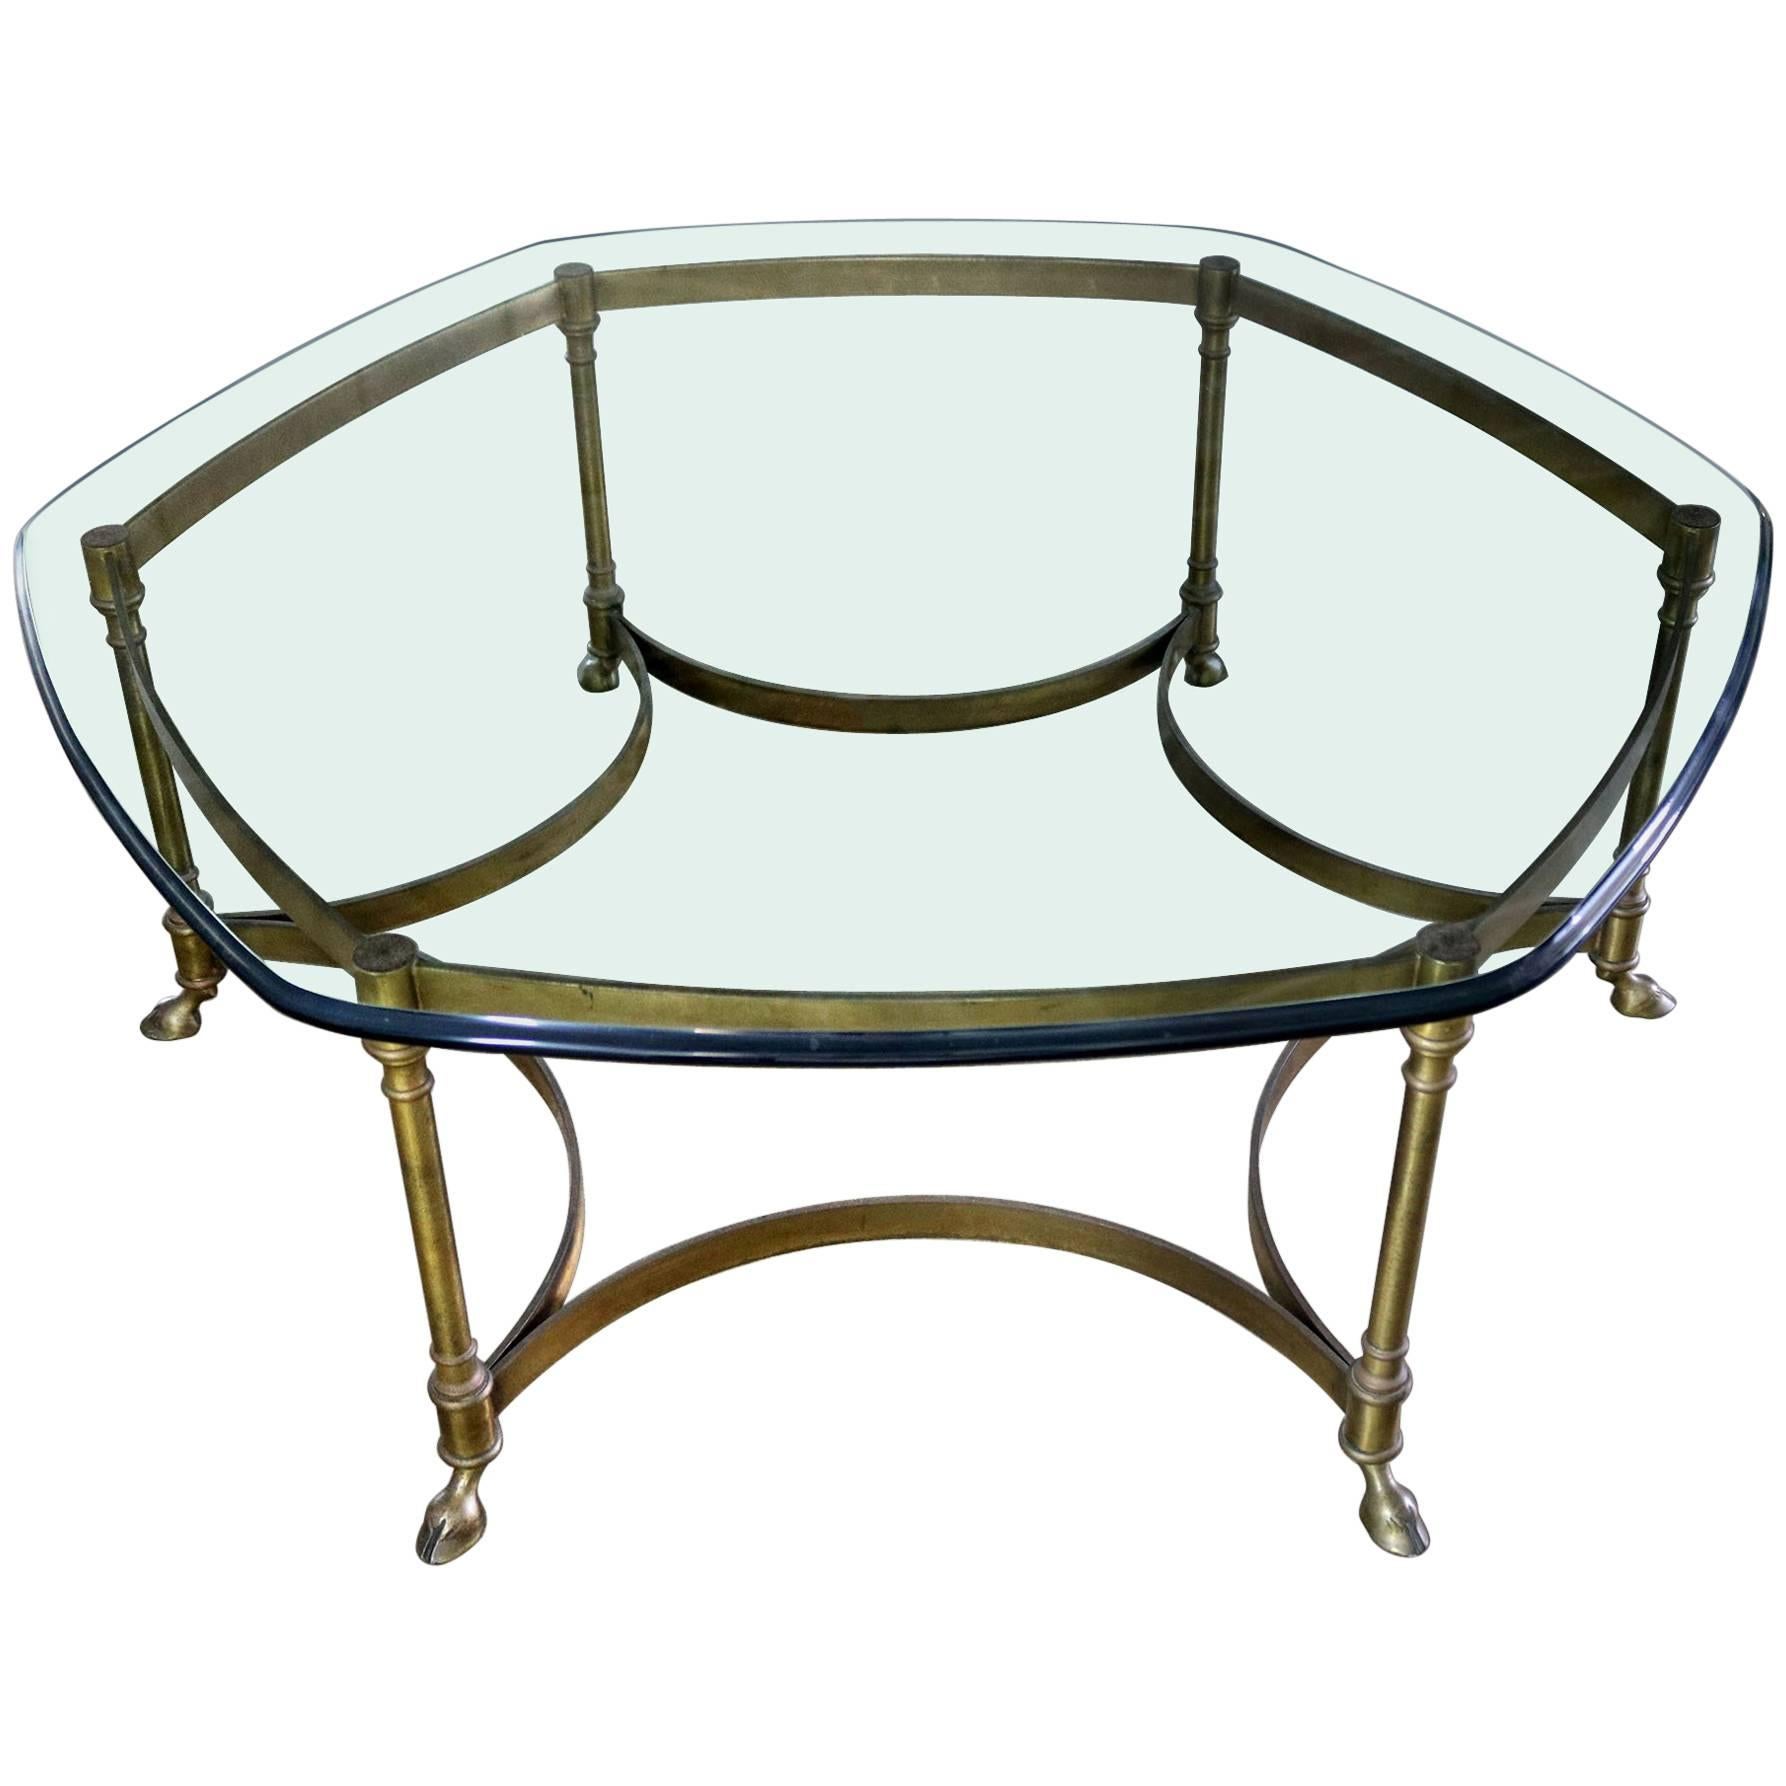 Neoclassical Hollywood Regency Brass and Glass Hexagon Coffee Table Hoof Feet